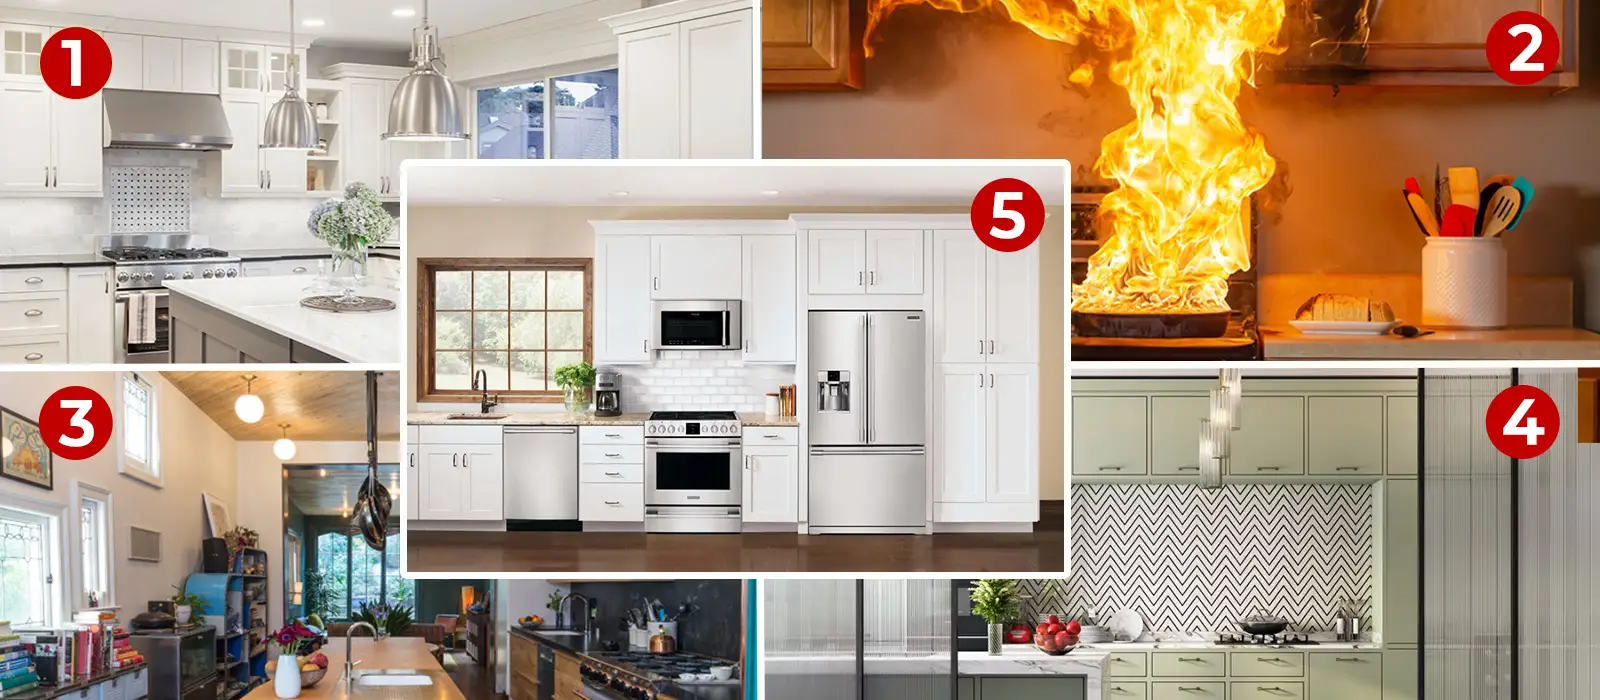 The Element of Fire: 5 Deadly Mistakes in Your Kitchen That Could Jeopardize Your Health!